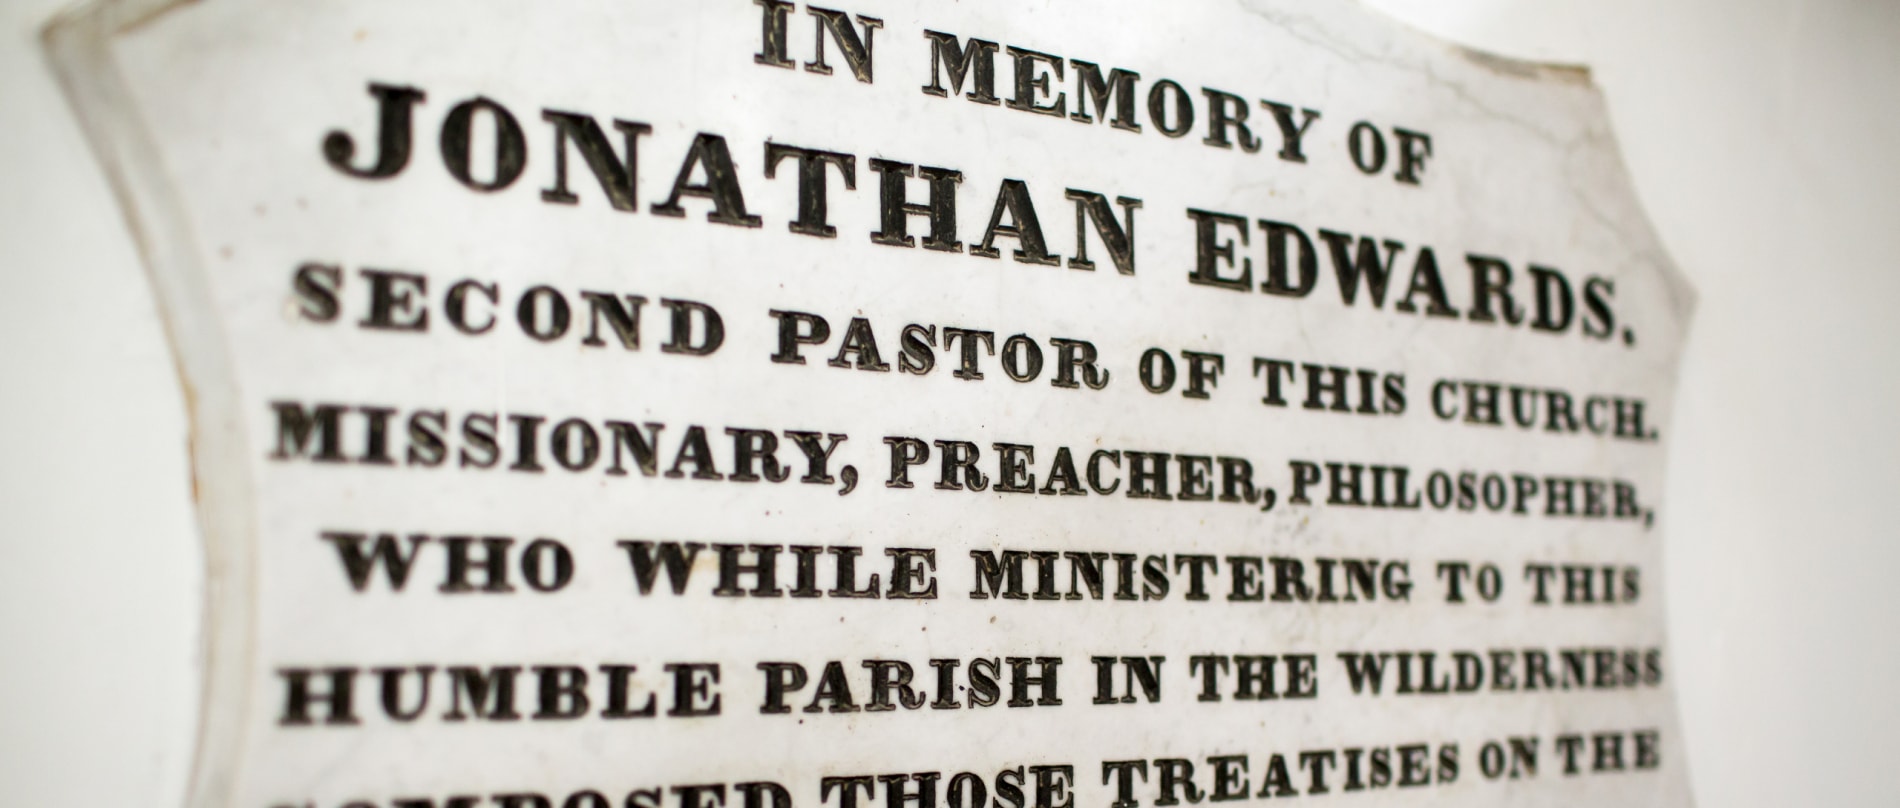 Memorial plaque in the church sanctuary, with the following text: In memory of Jonathan Edwards, second pastor of this church, missionary, preacher, philosopher, who while ministering to this humble parish in the wilderness composed those treatises on the freedom of the will and on original sin which have given him universal fame.